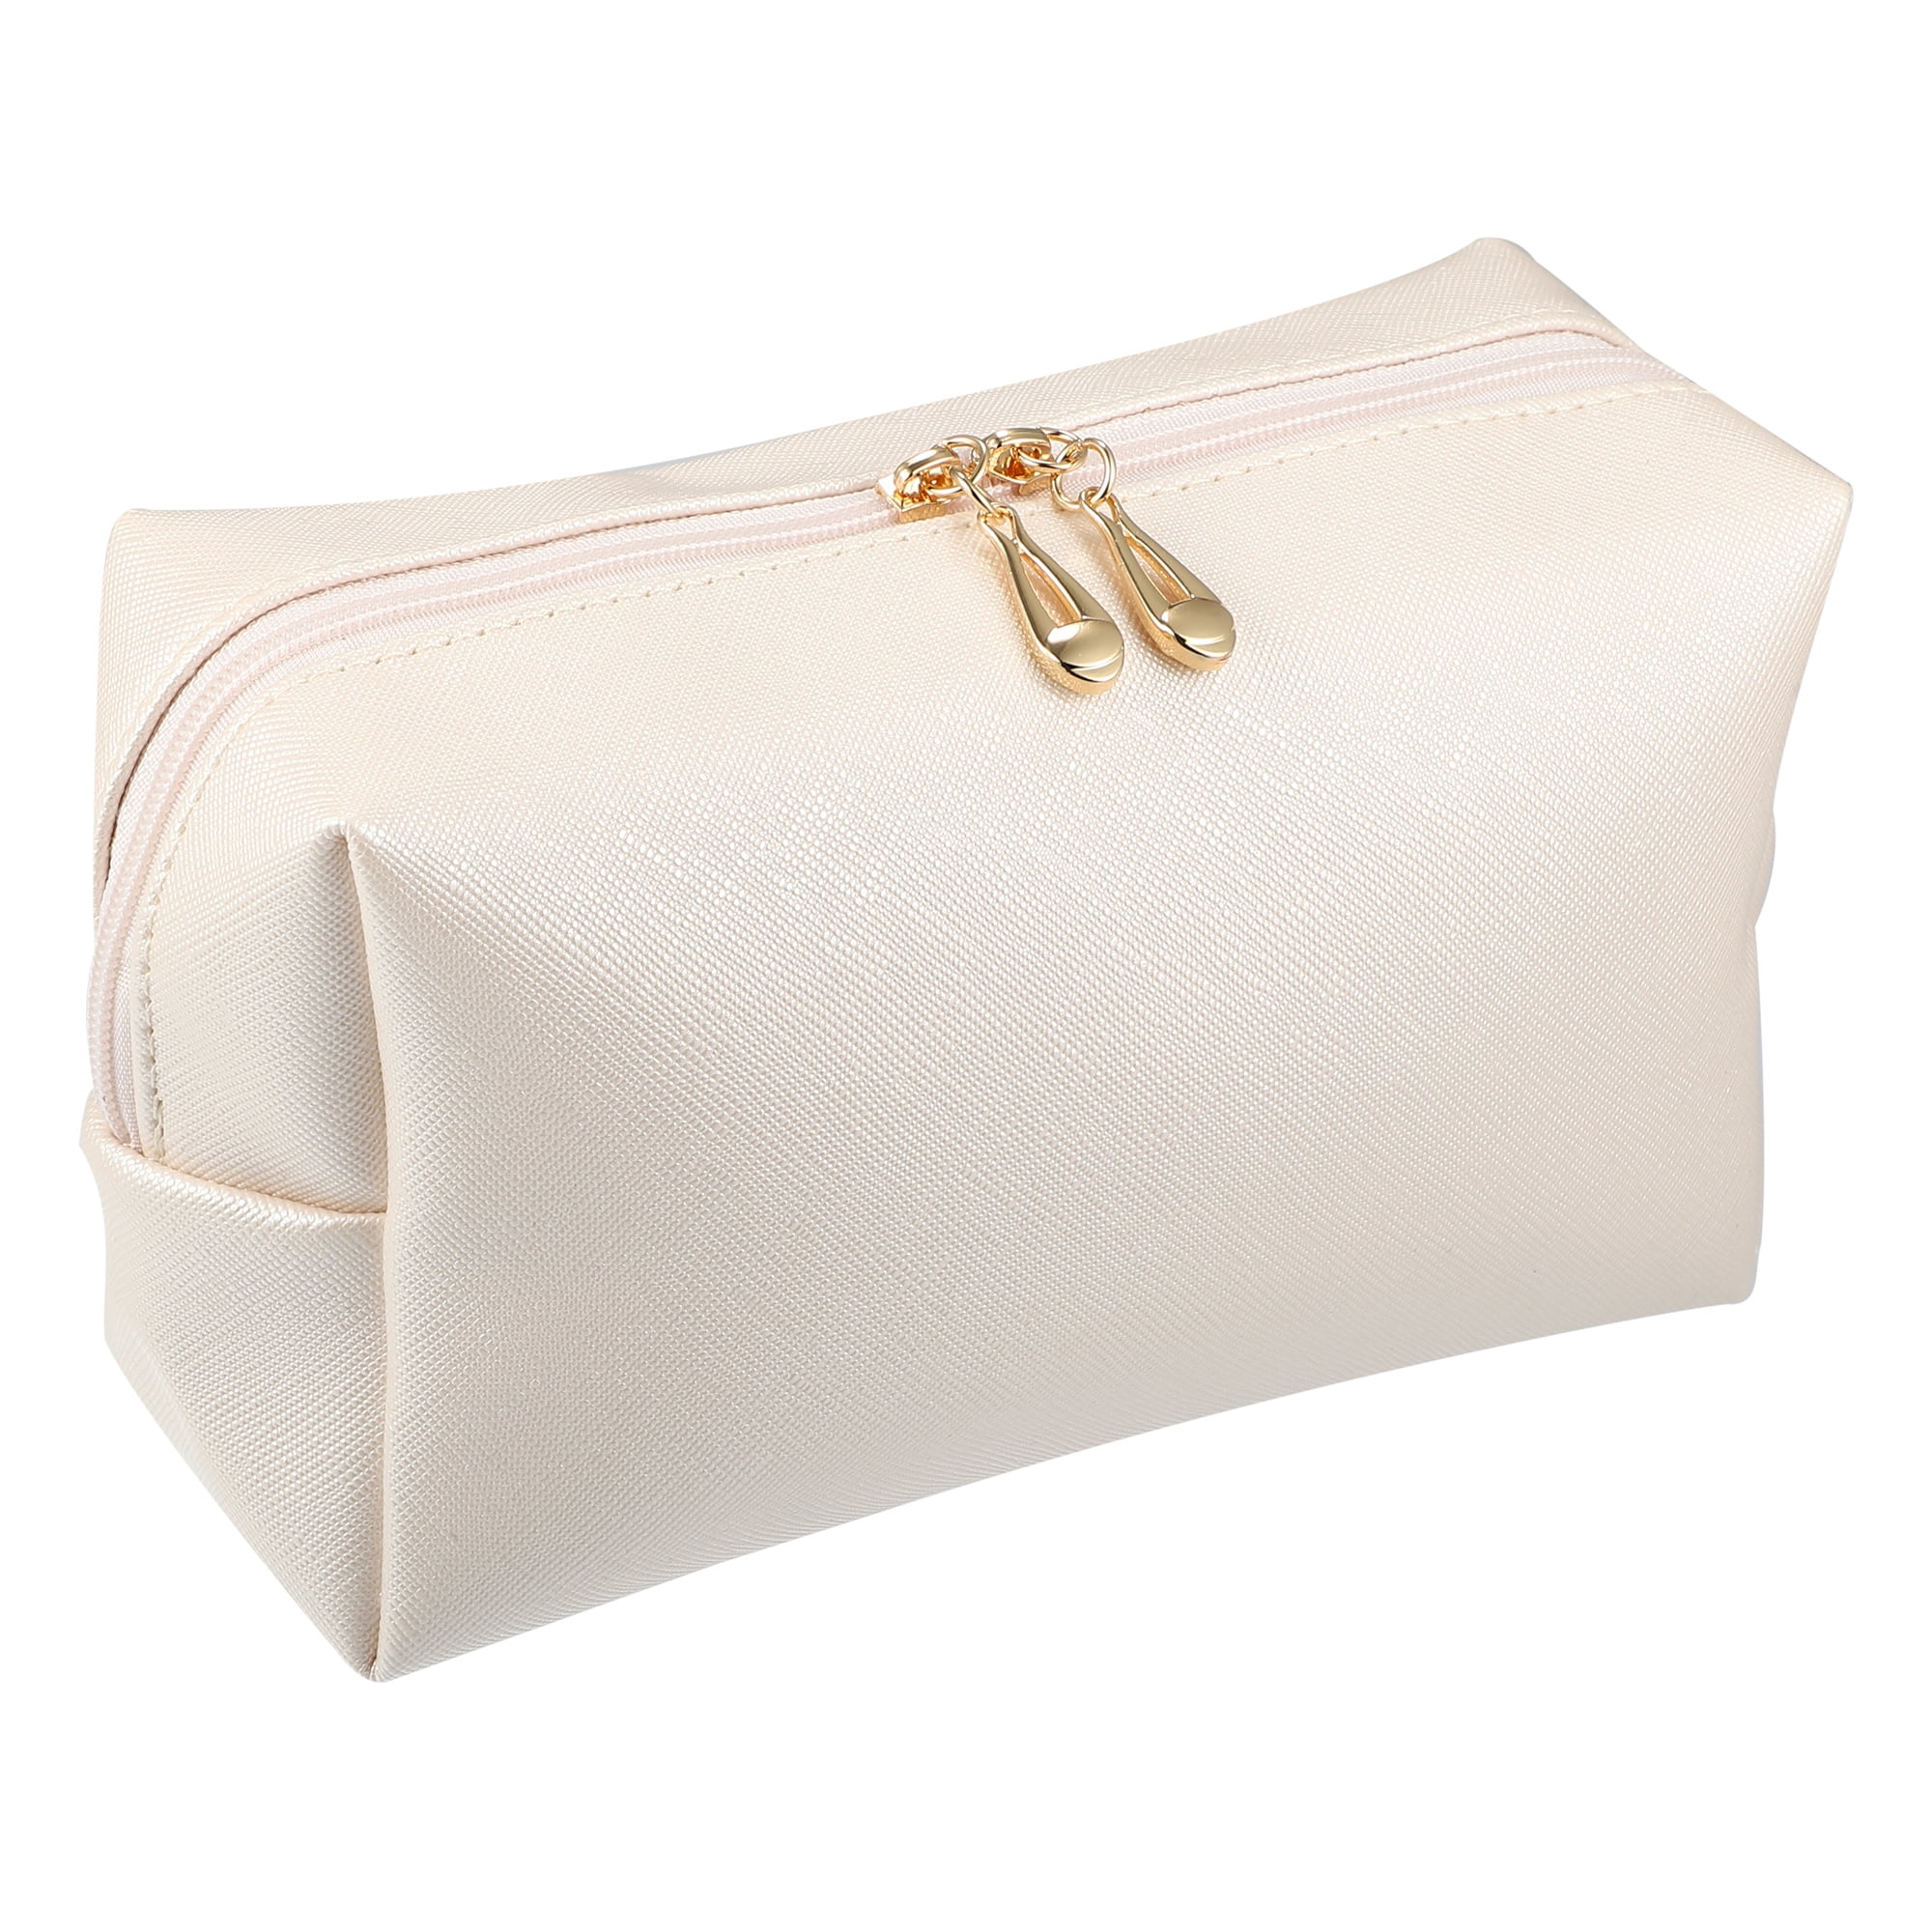 MAKEUP BAG  Large White Leather Makeup Bag with Gold Accents – Lavaa Beauty